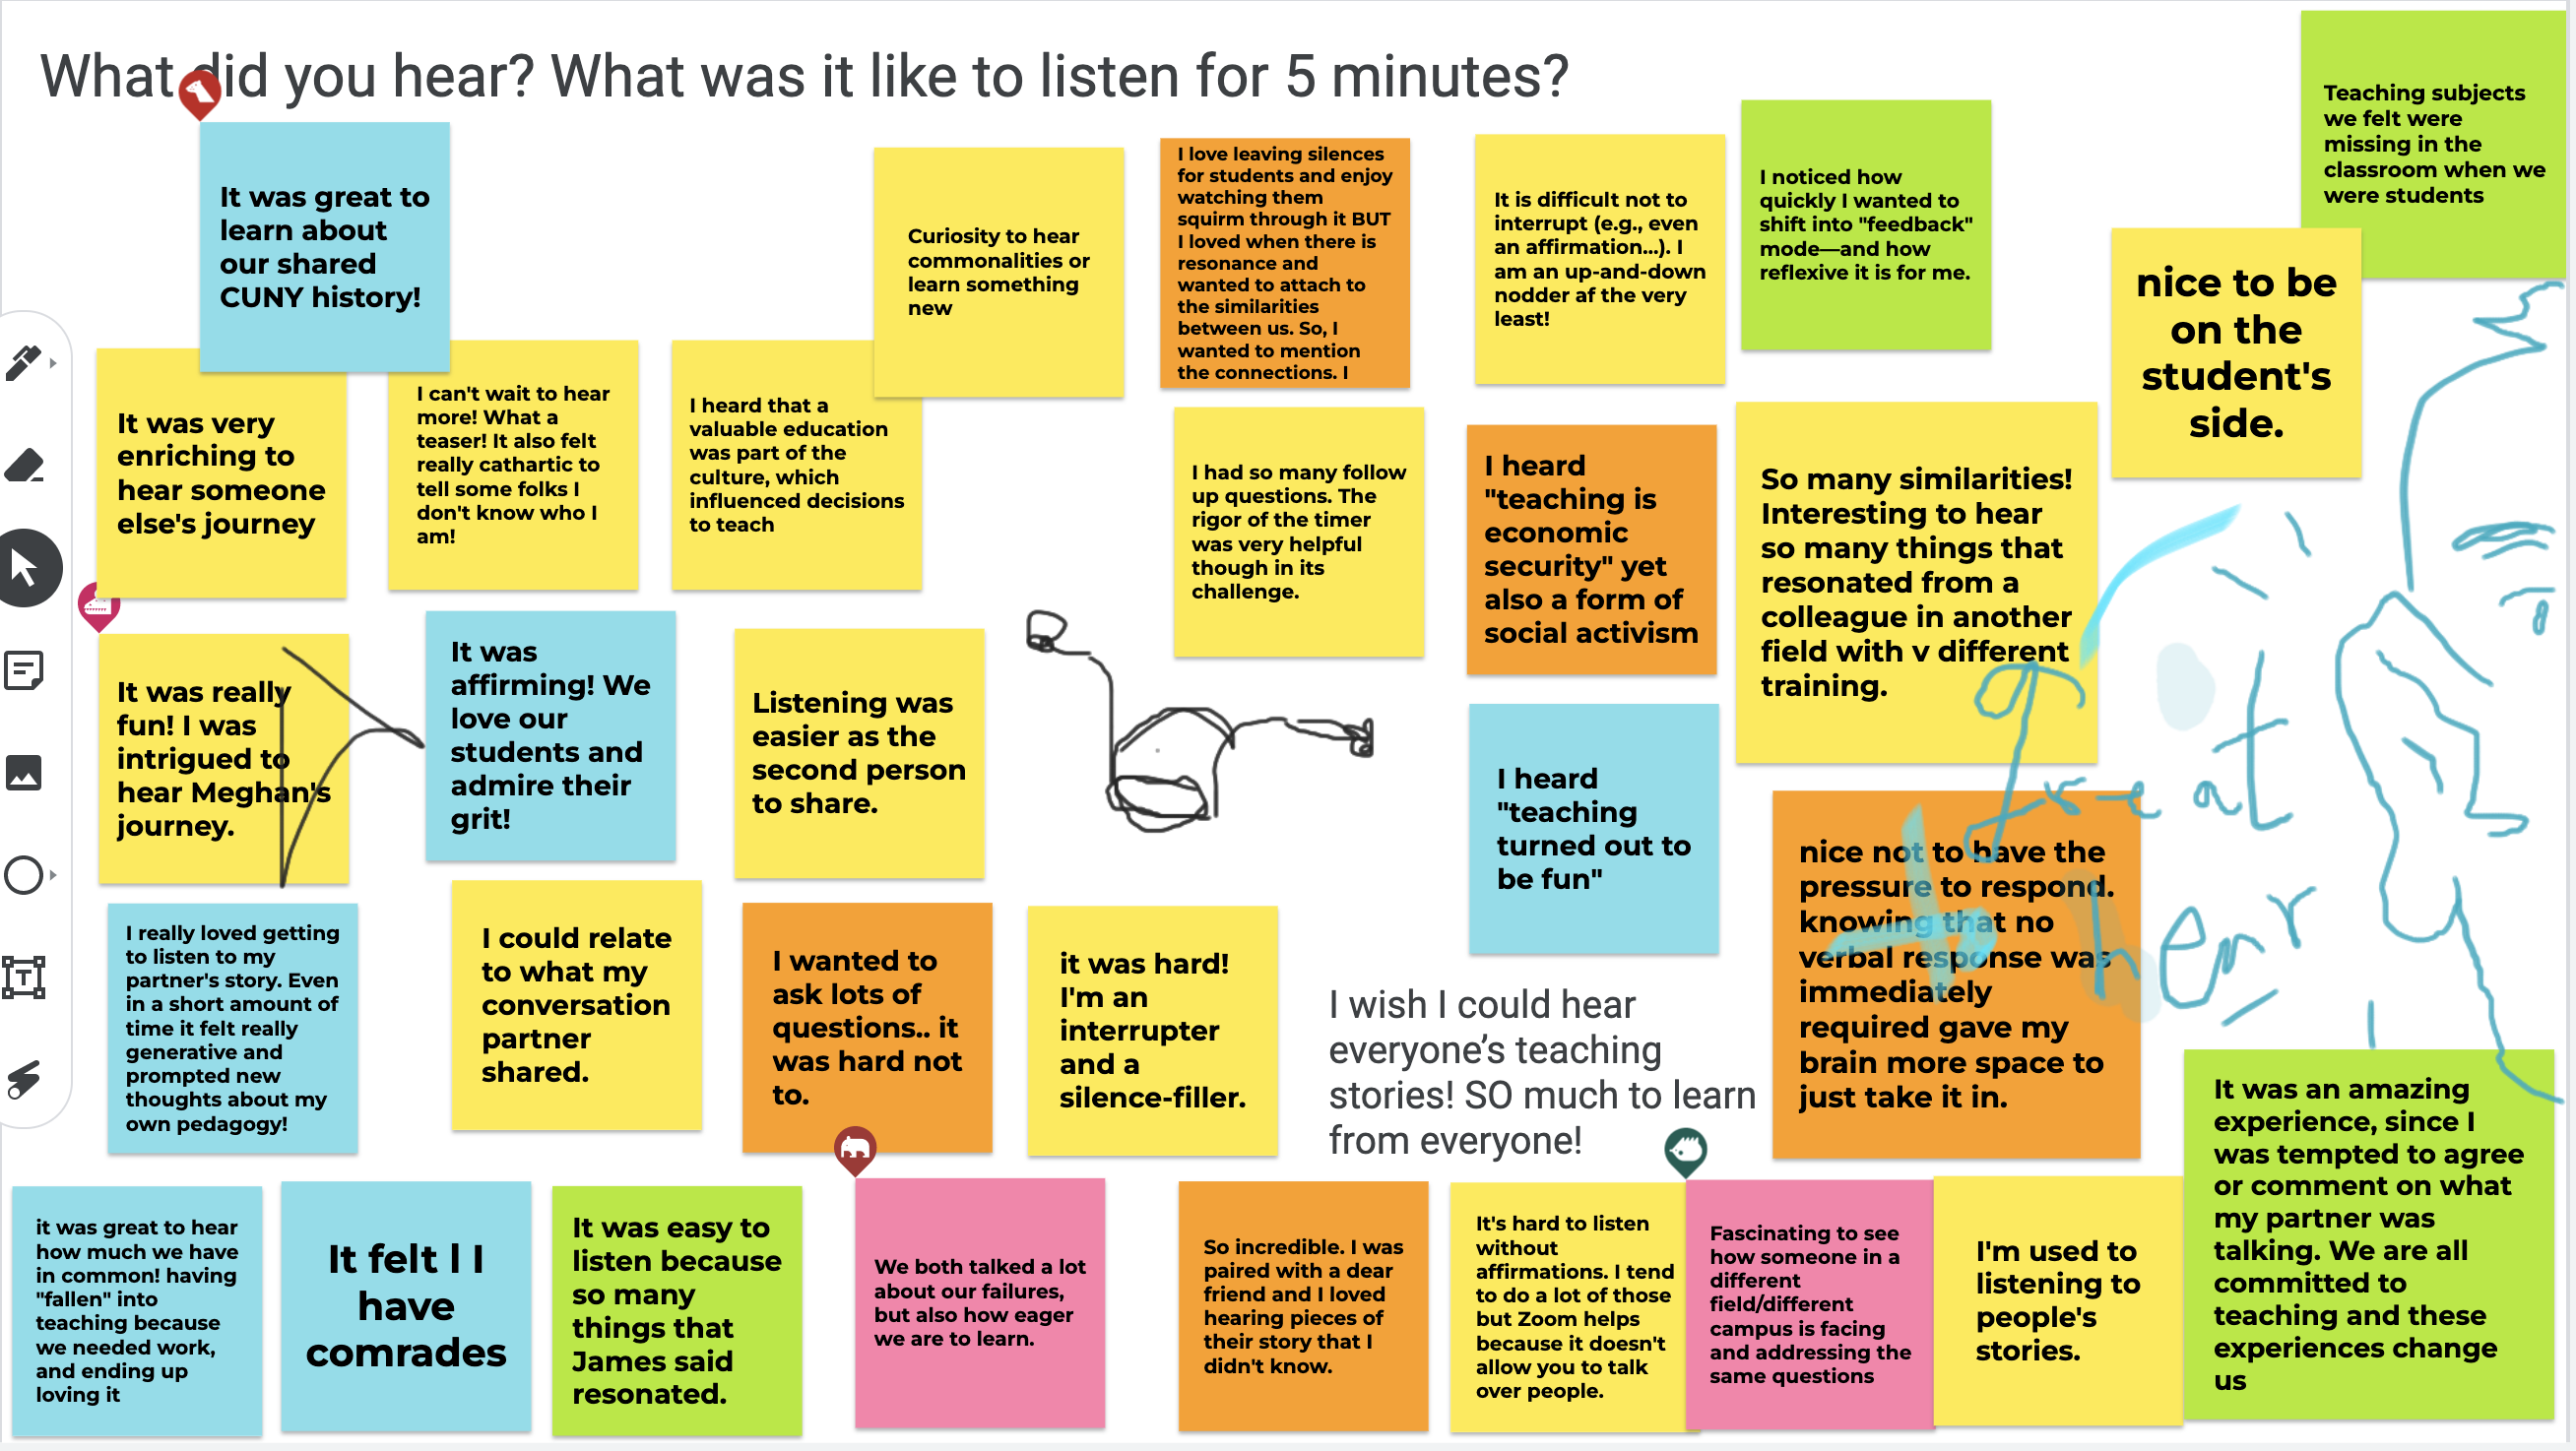 Summer Institute Jamboard: What did you hear? What was it like to listen for 5 minutes? - Jamboard with sticky notes generated by the faculty fellows